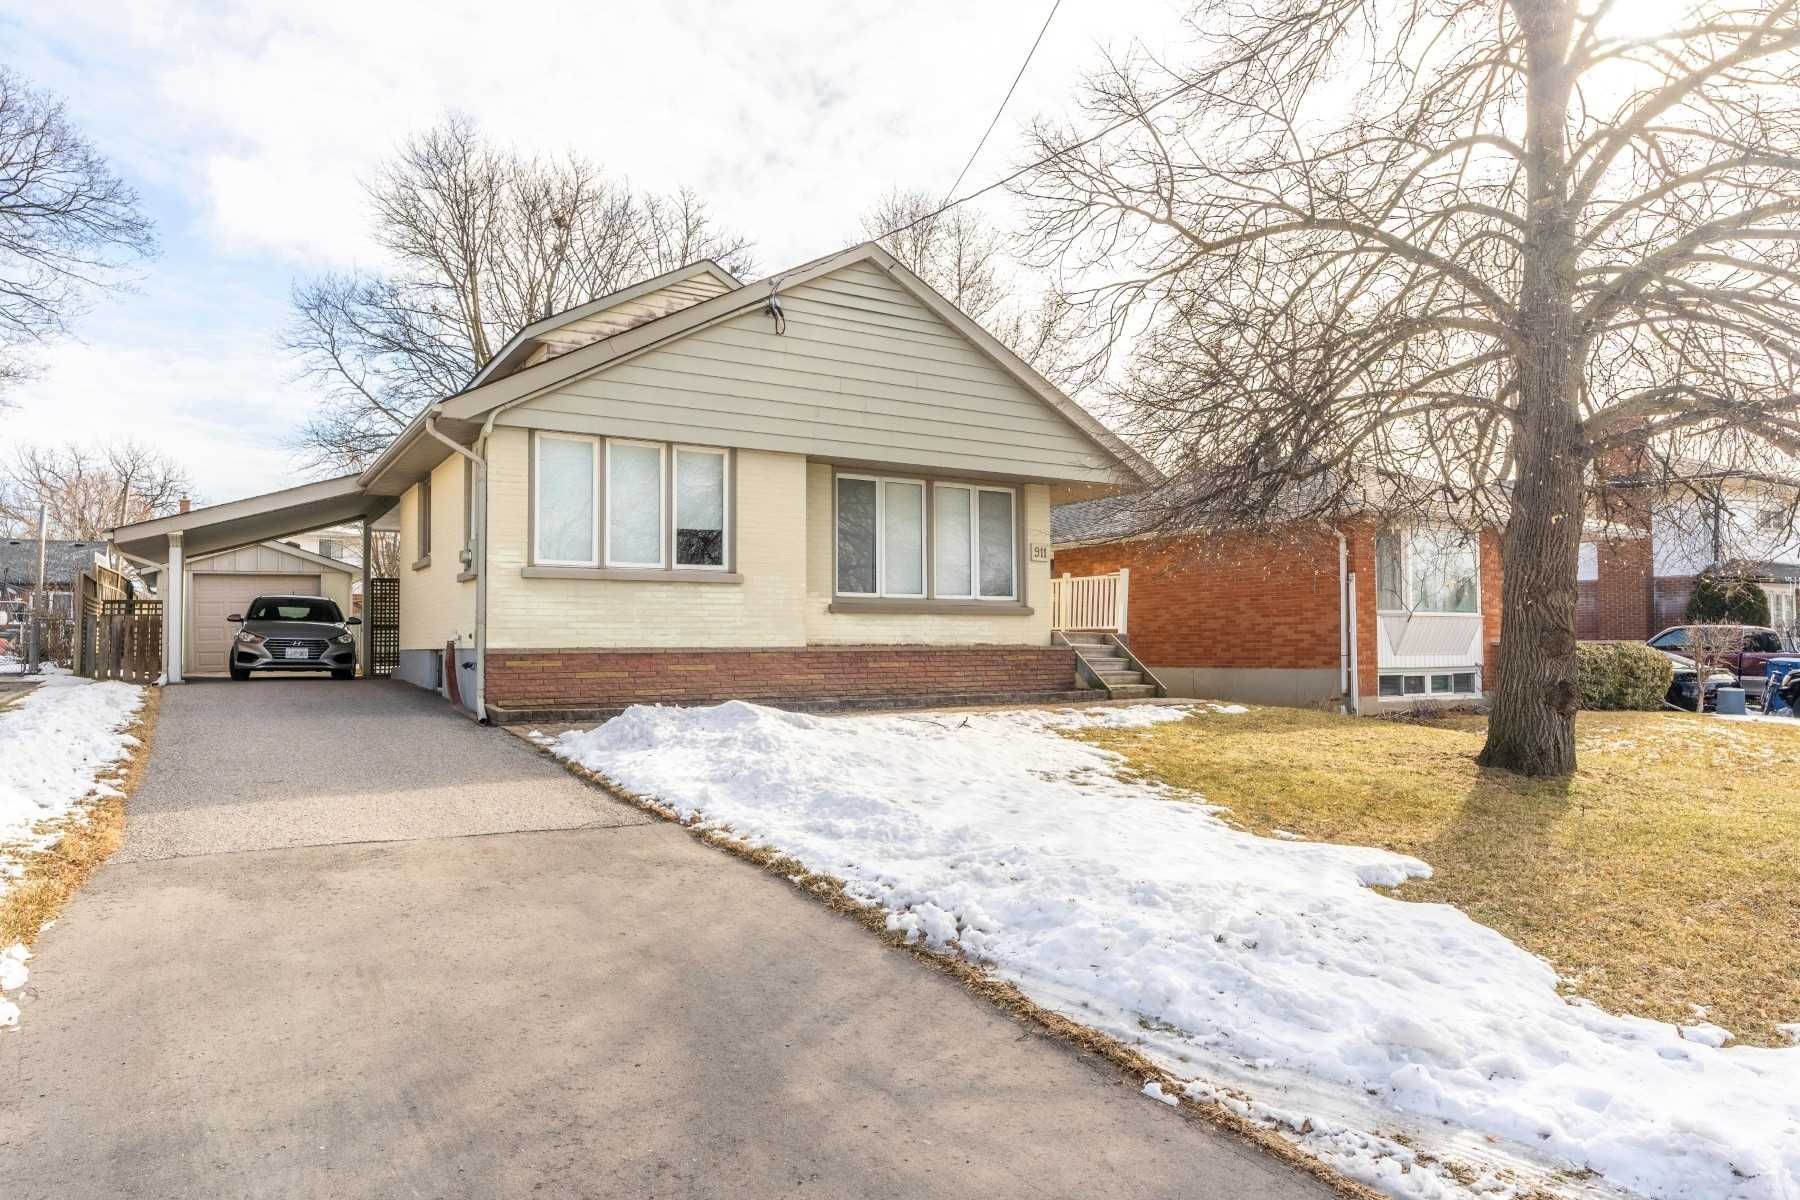 Main Photo: 911 King Street in Whitby: Downtown Whitby House (Bungalow) for sale : MLS®# E4698129